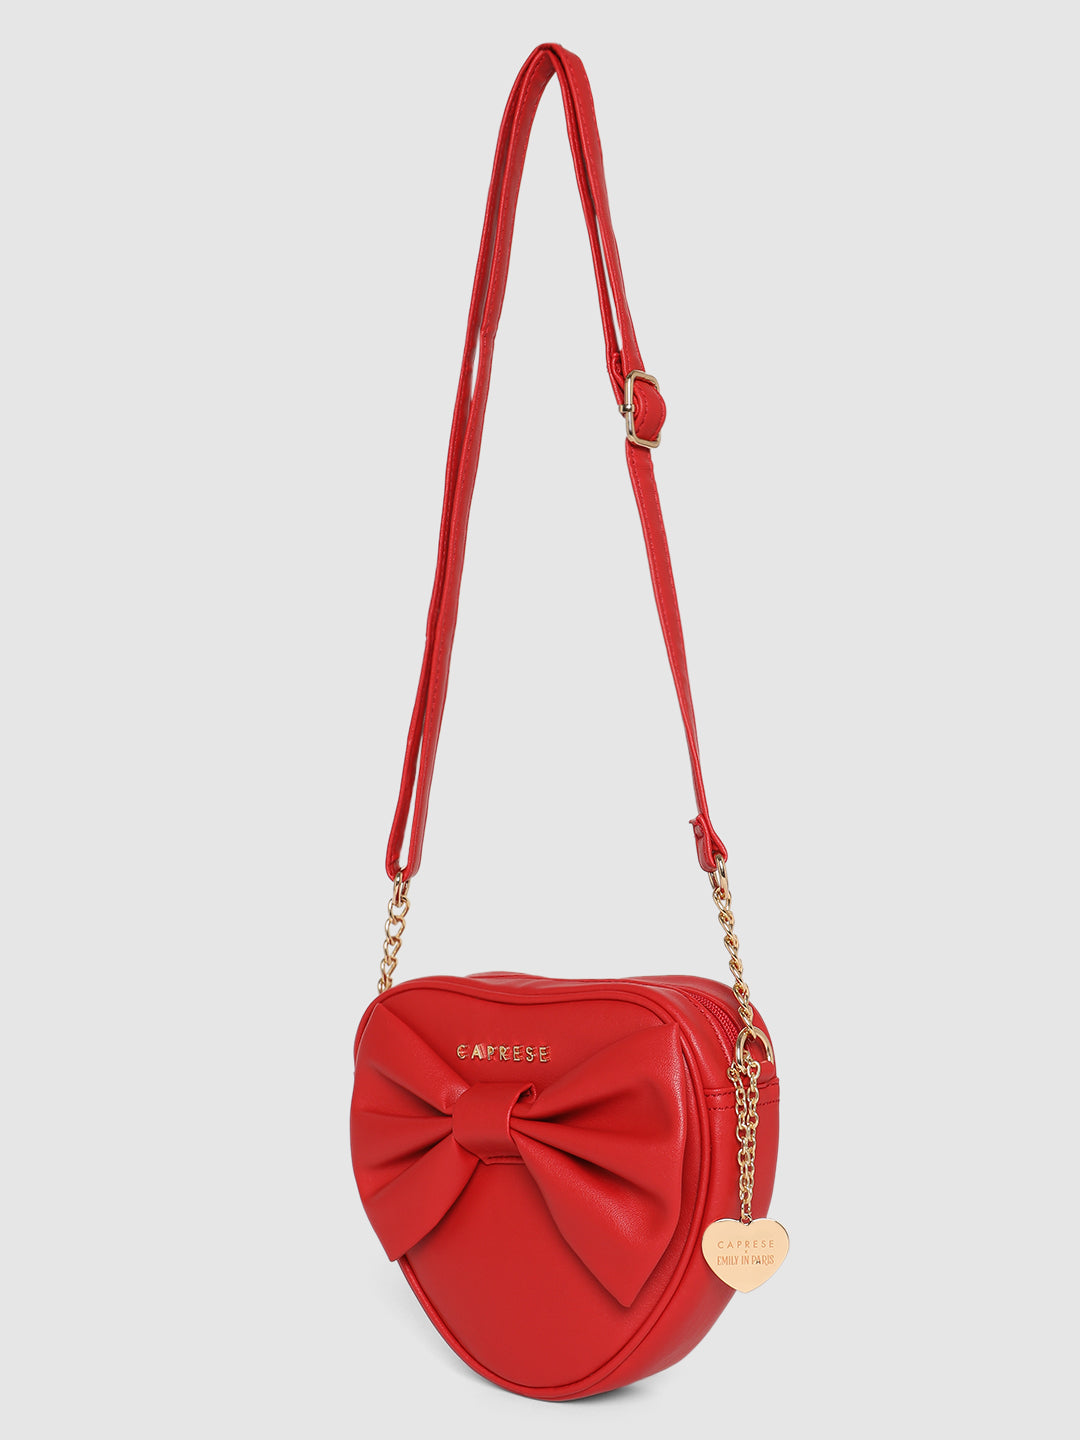 Caprese Emily in Paris Heart Shape with Bow Sling Bag